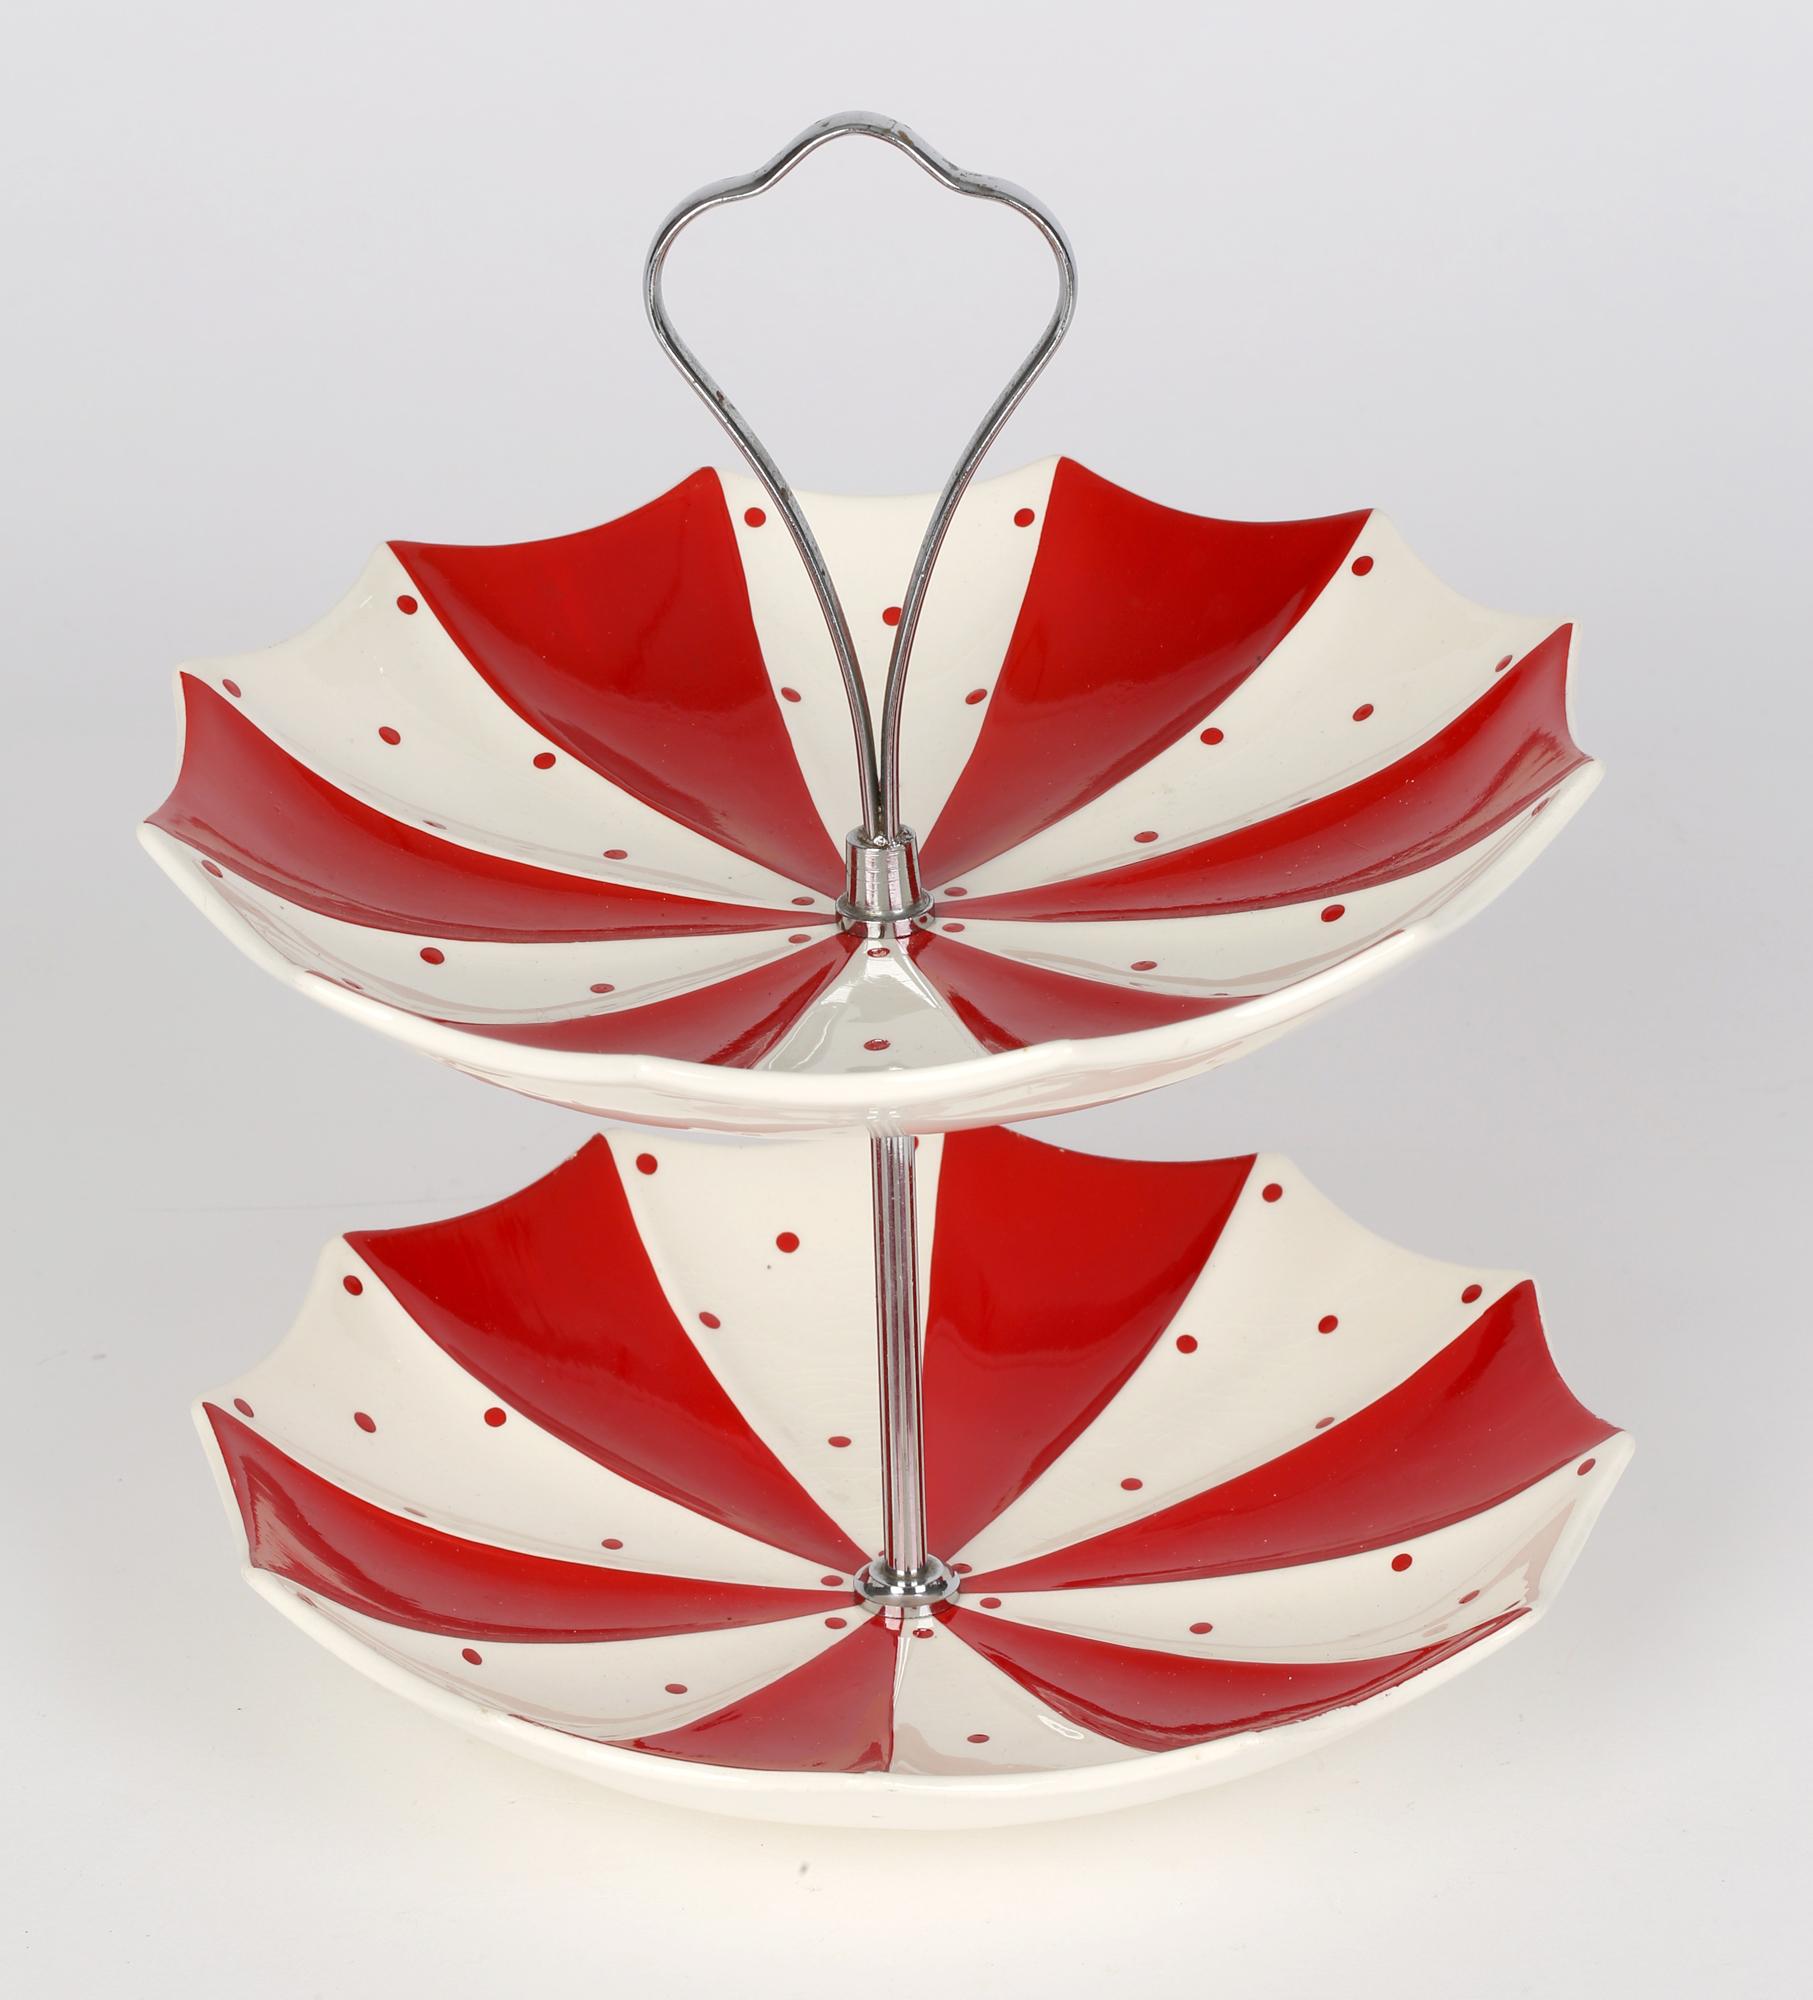 English Jessie Tate Midwinter Modern Fashion Shape Red Domino Two Tier Cake Stand